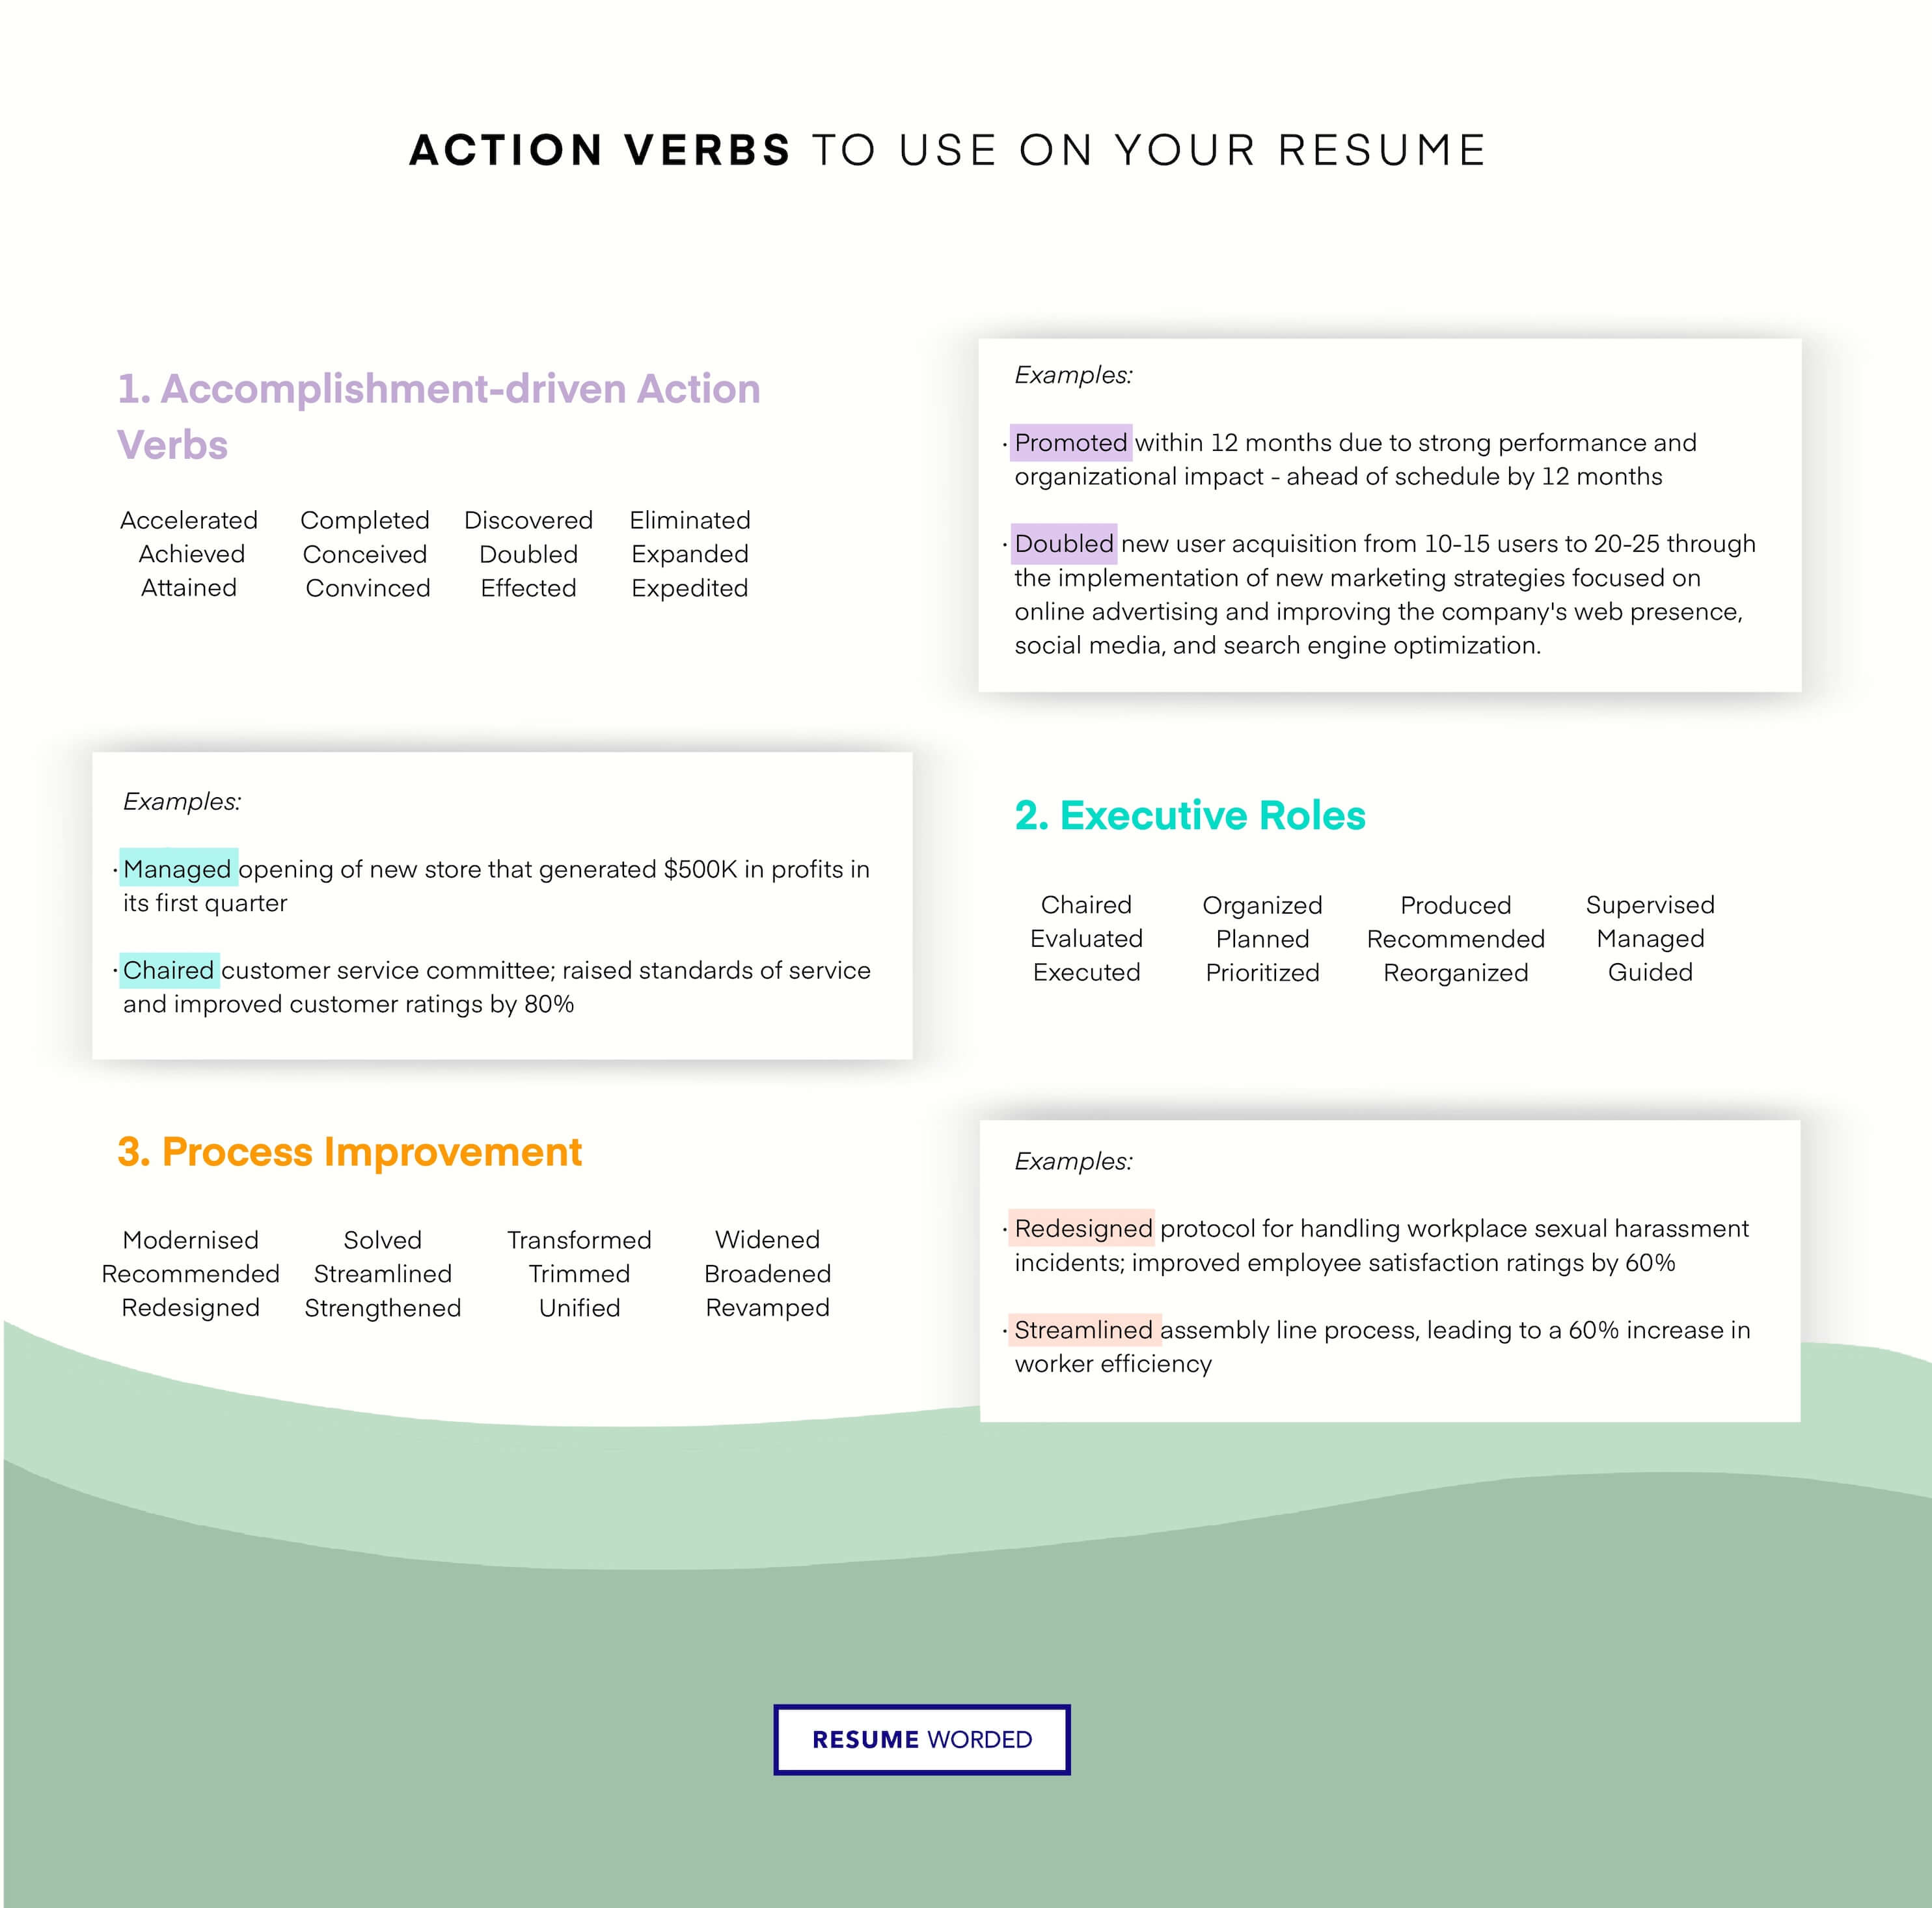 Use strong action verbs to make past accomplishments stand out - Portfolio Manager Resume